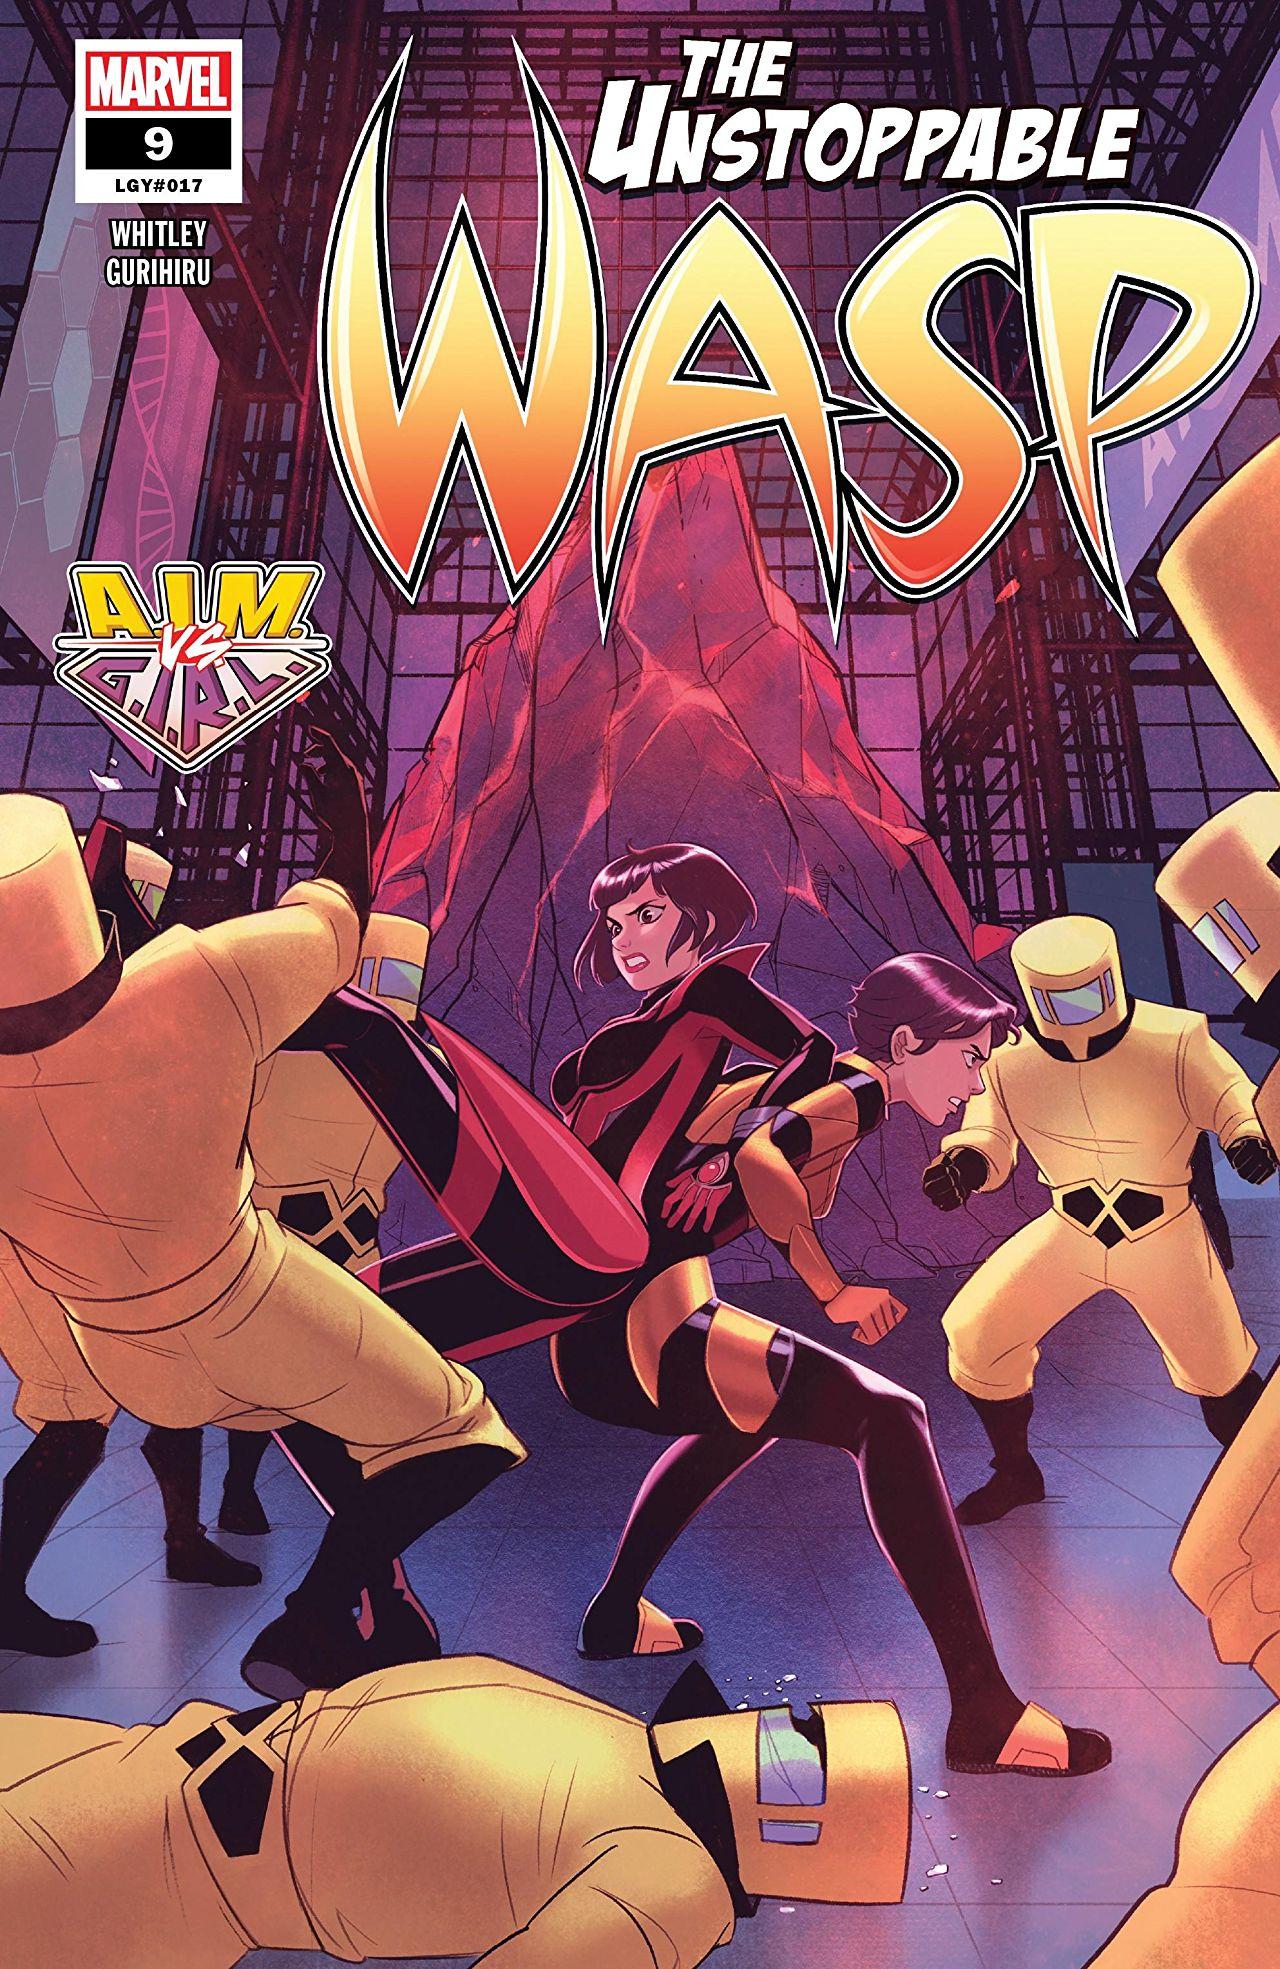 Unstoppable Wasp Vol. 2 #9